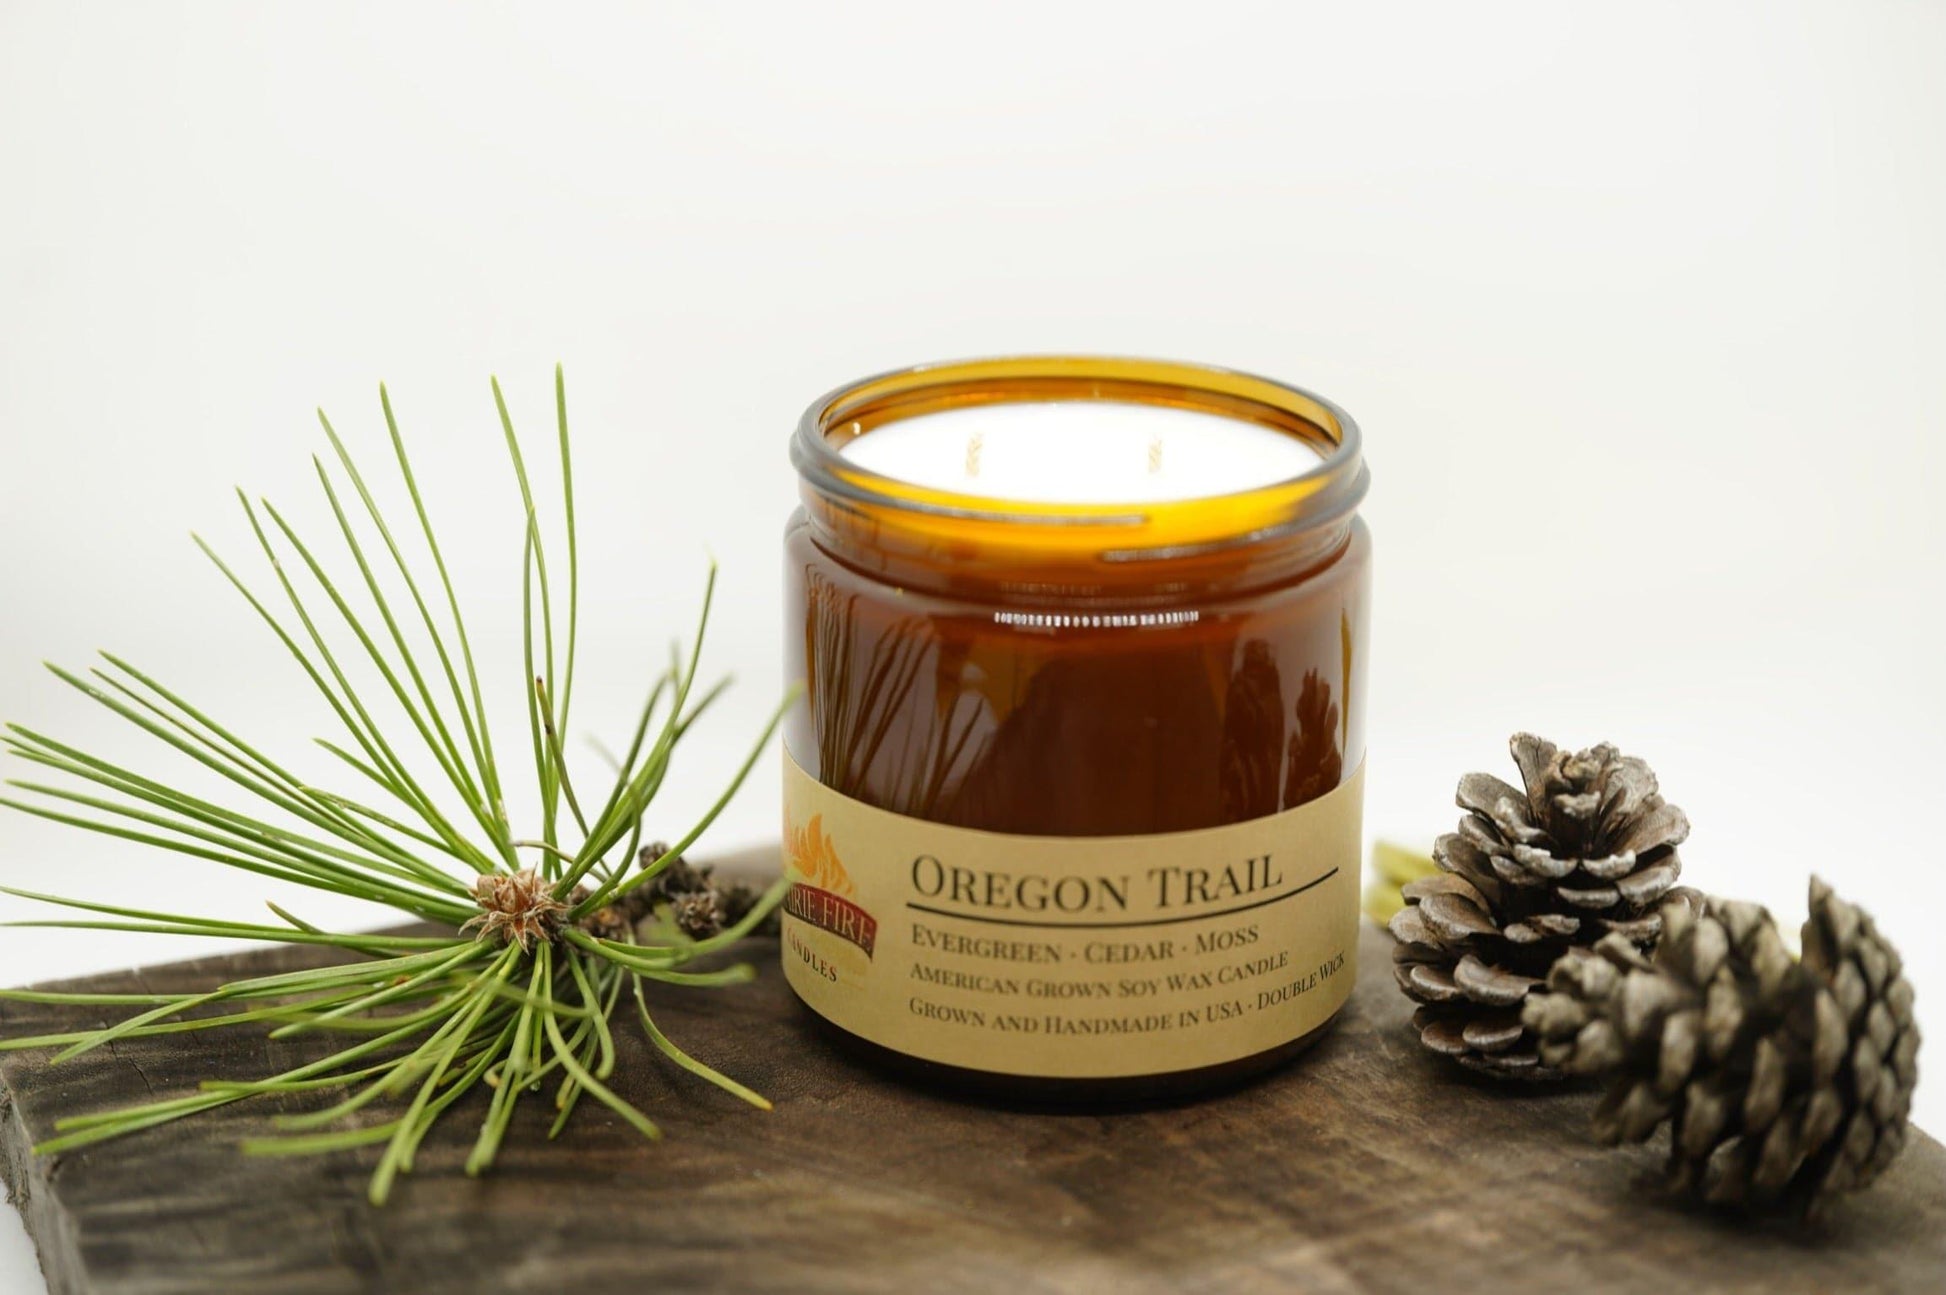 Oregon Trail Soy Wax Candle | 16 oz Double Wick Amber Apothecary Jar - Prairie Fire Candles